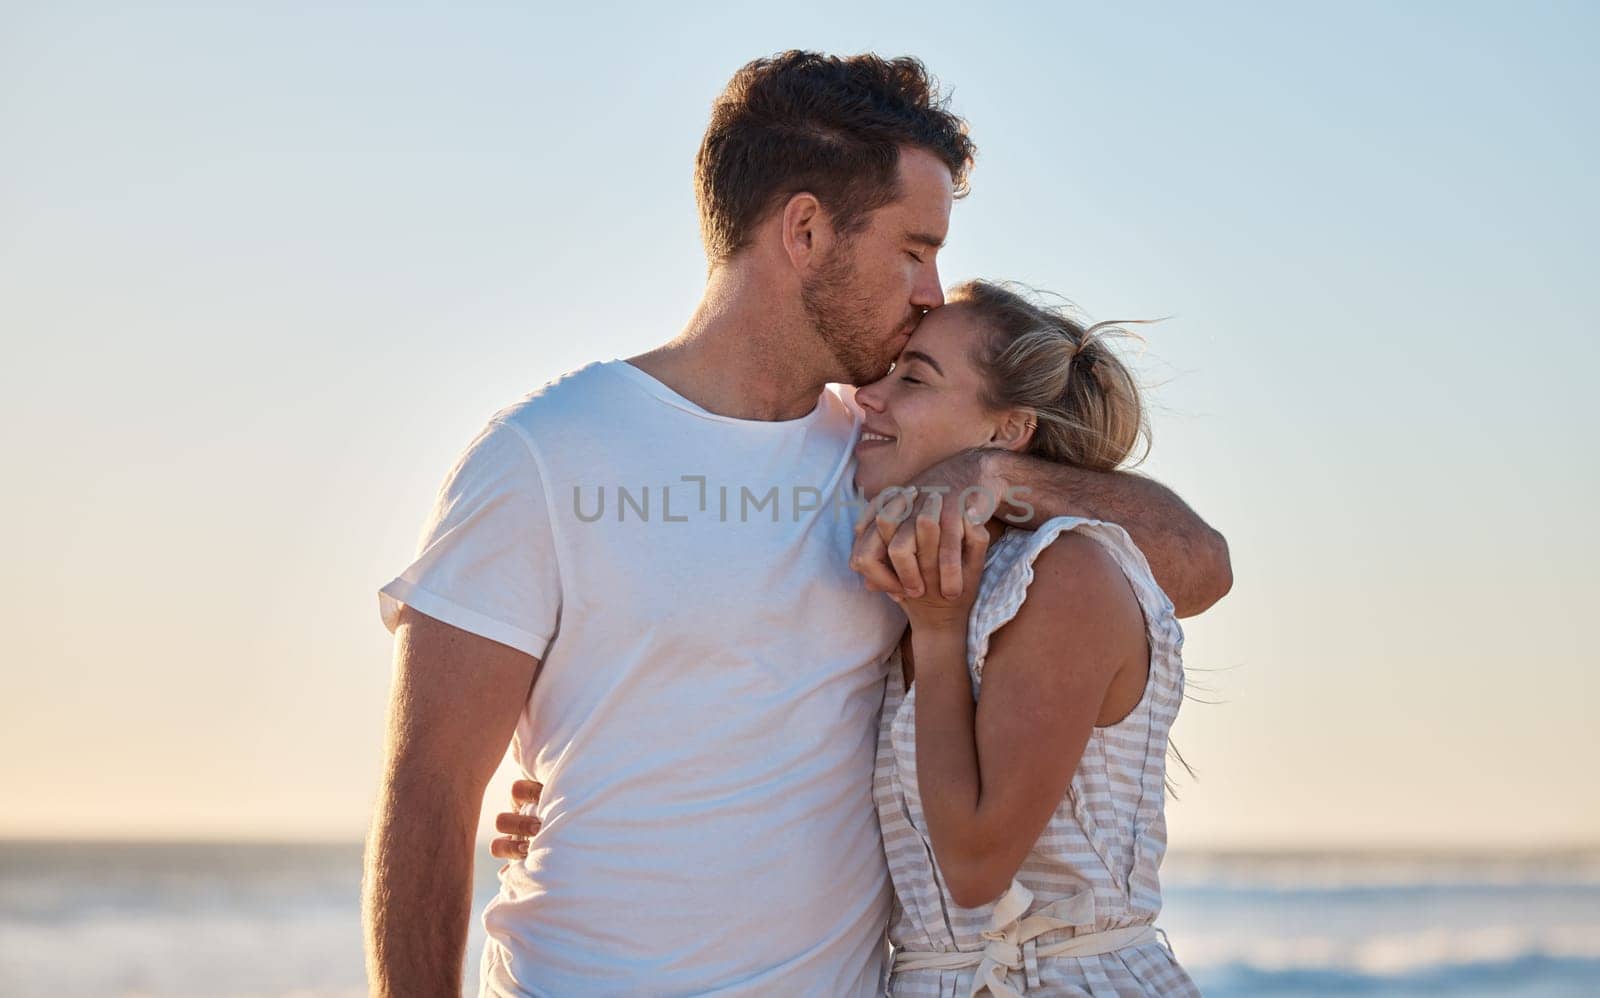 Love, summer and couple kiss at beach for intimacy, romance and loving relationship on honeymoon. Dating, affection and man and woman bonding and enjoy holiday, vacation and weekend together by ocean by YuriArcurs